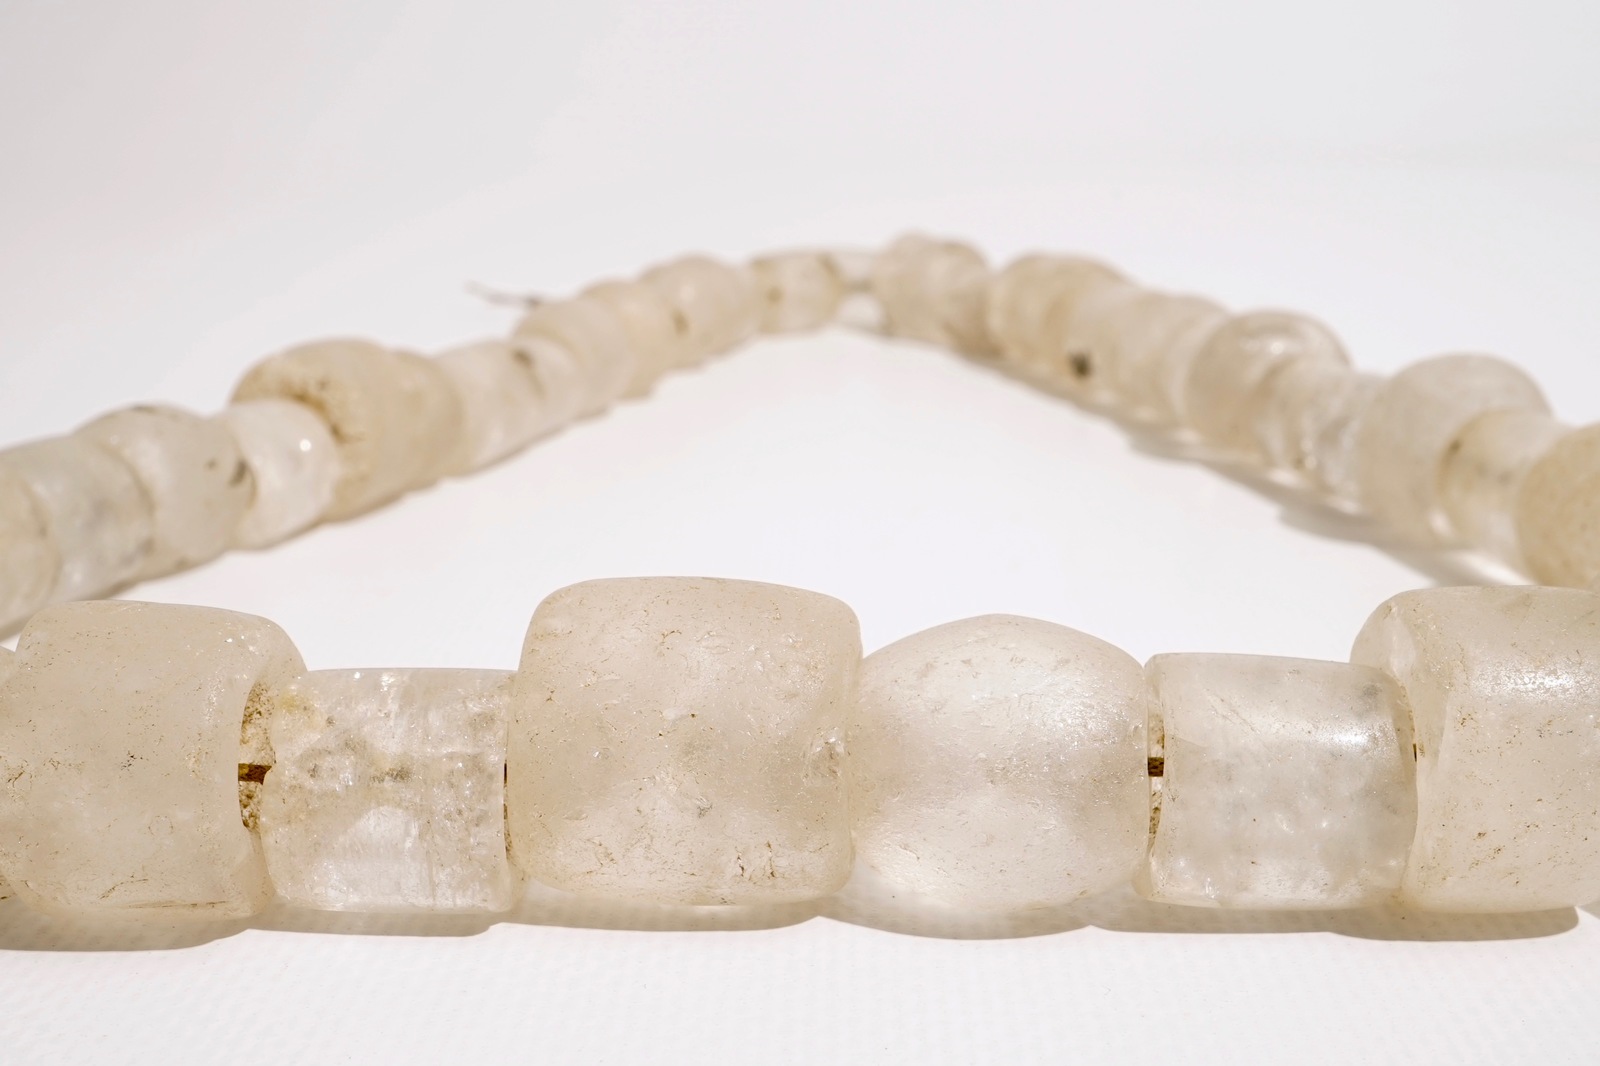 A pre-Columbian rock crystal necklace, Tairona culture carved stone pendants, Colombia, 15/10th C. - Image 3 of 3